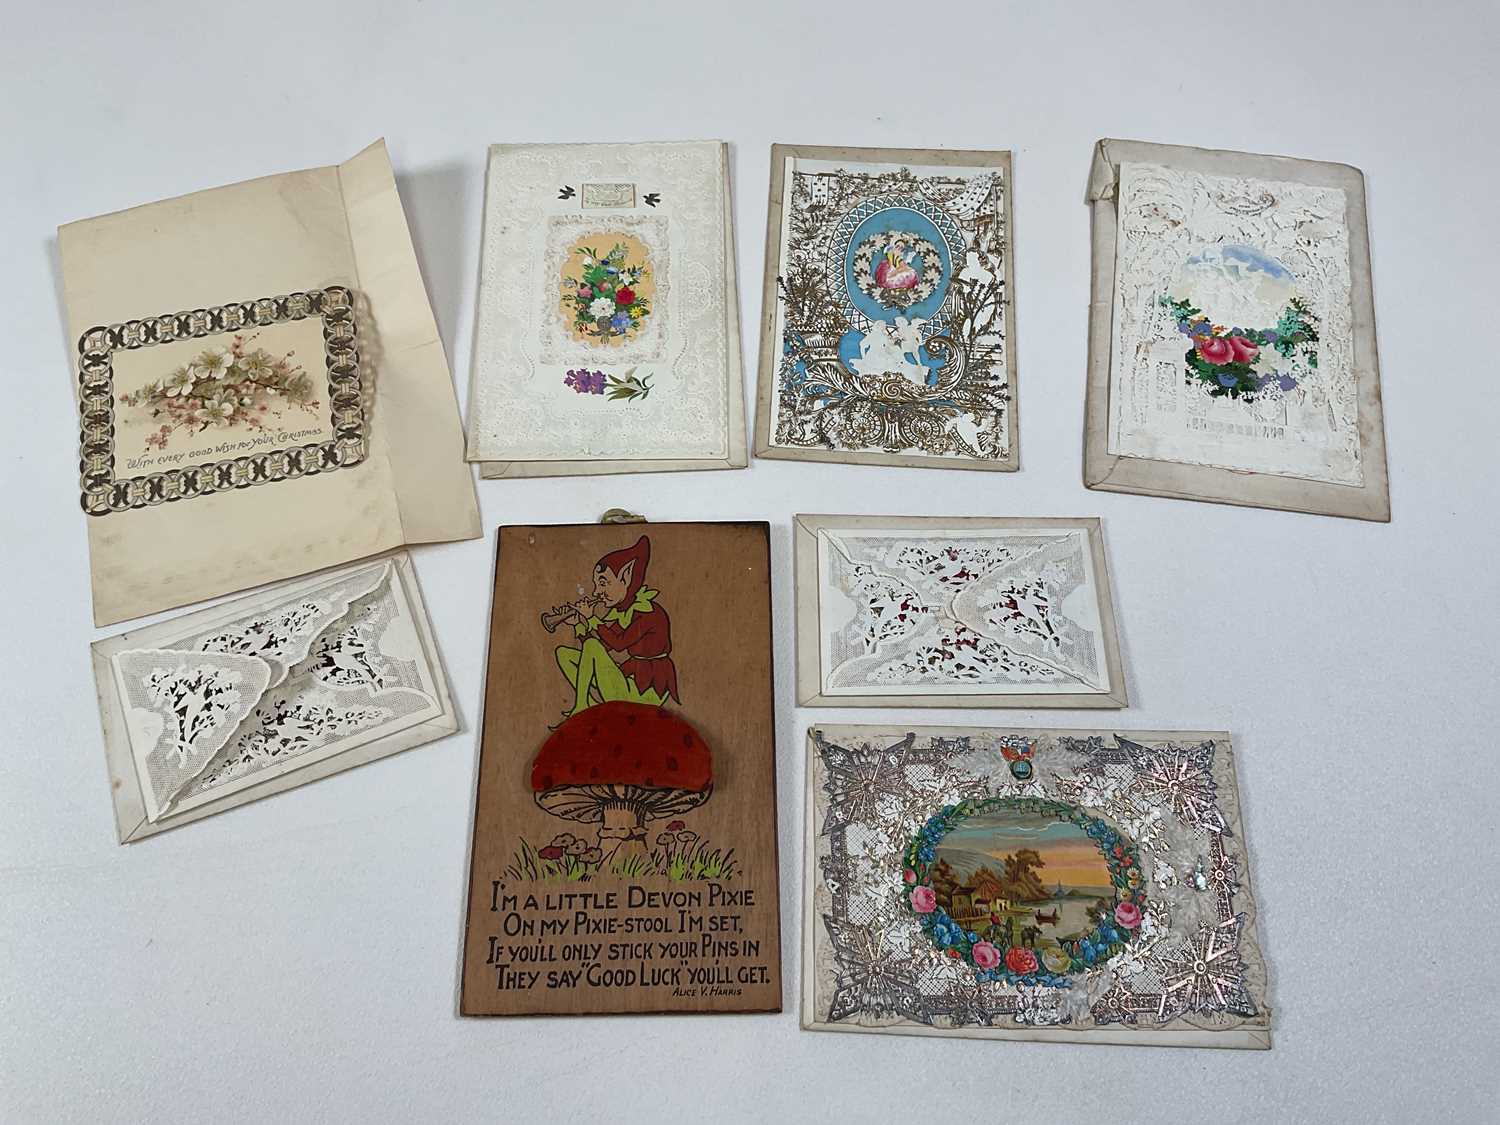 An interesting collection of 19th century Valentines and a pin cushion inscribed 'I'm a little Devon